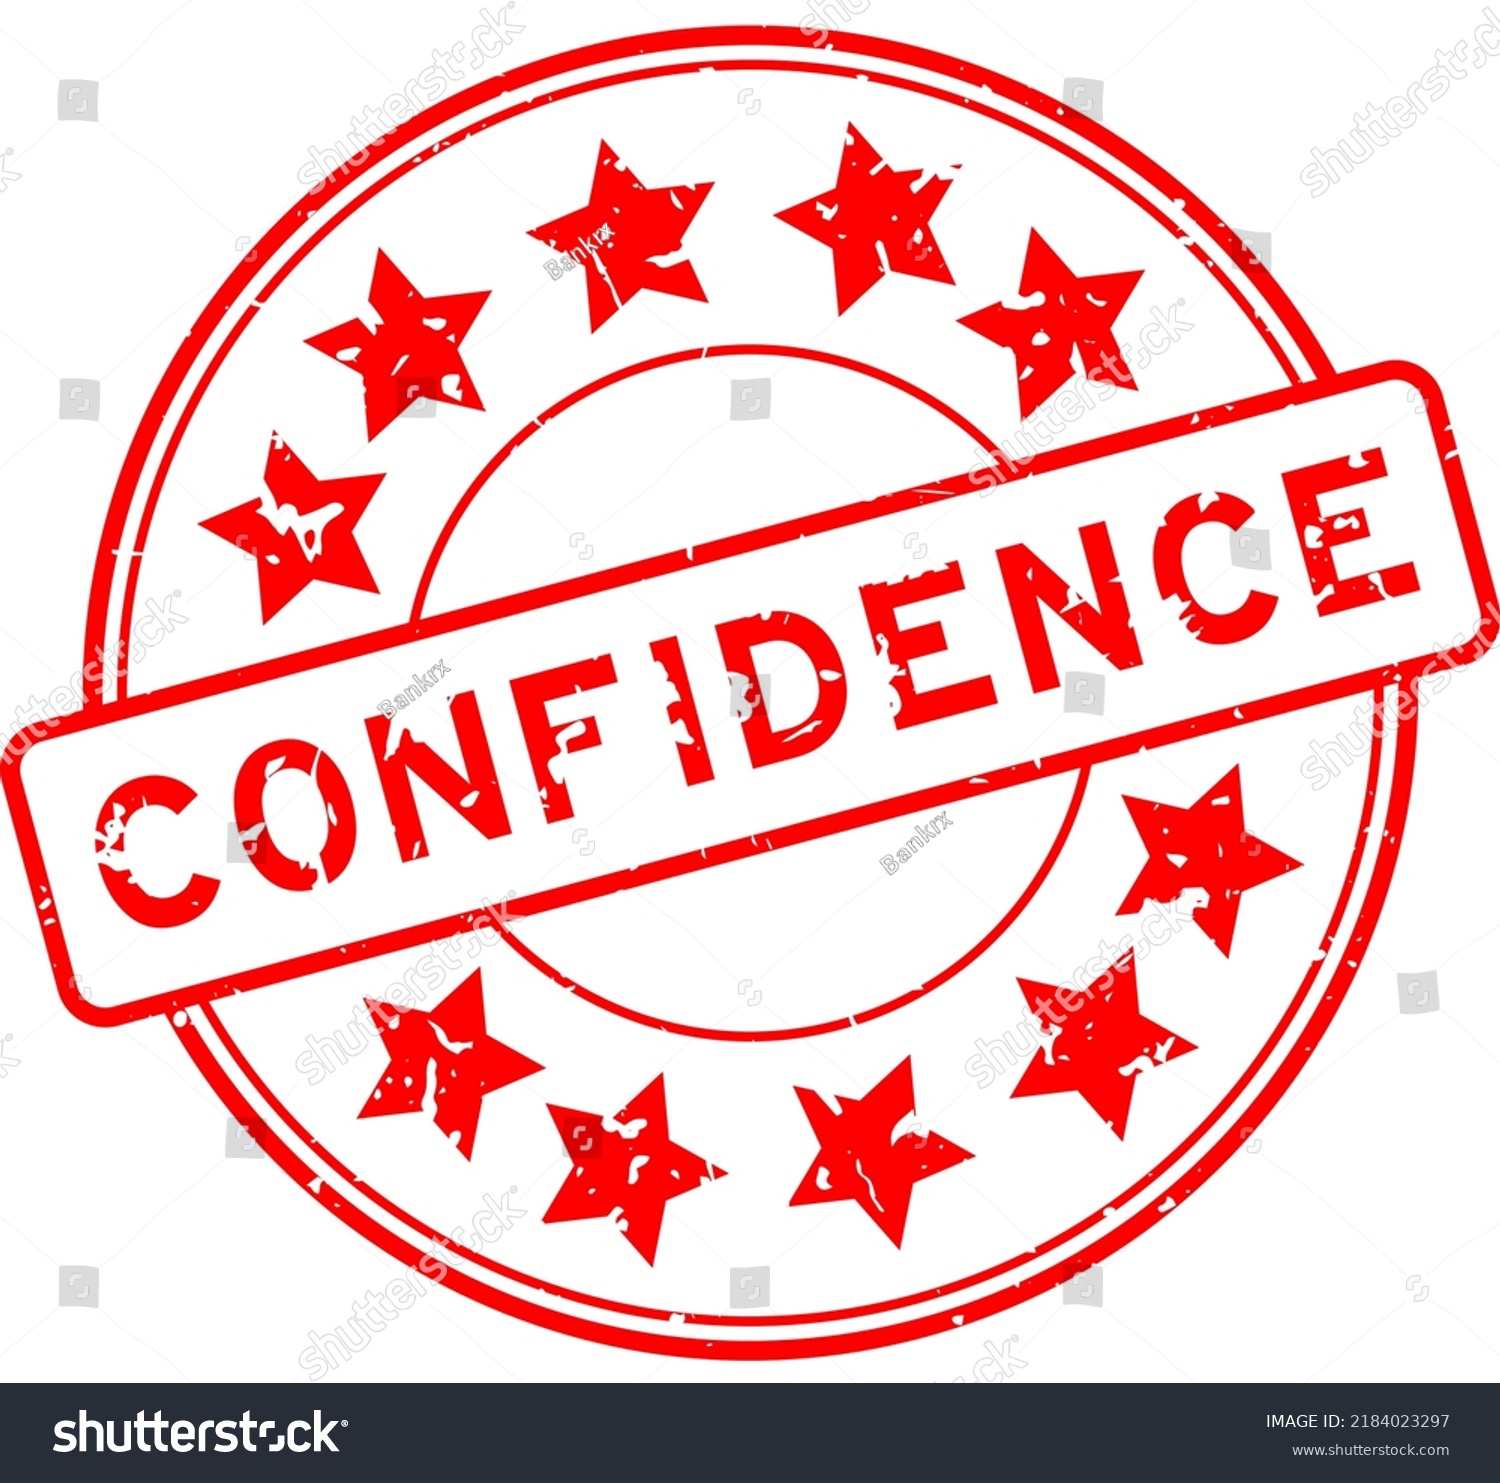 Grunge red confidence word with star icon round rubber seal stamp on white background #2184023297